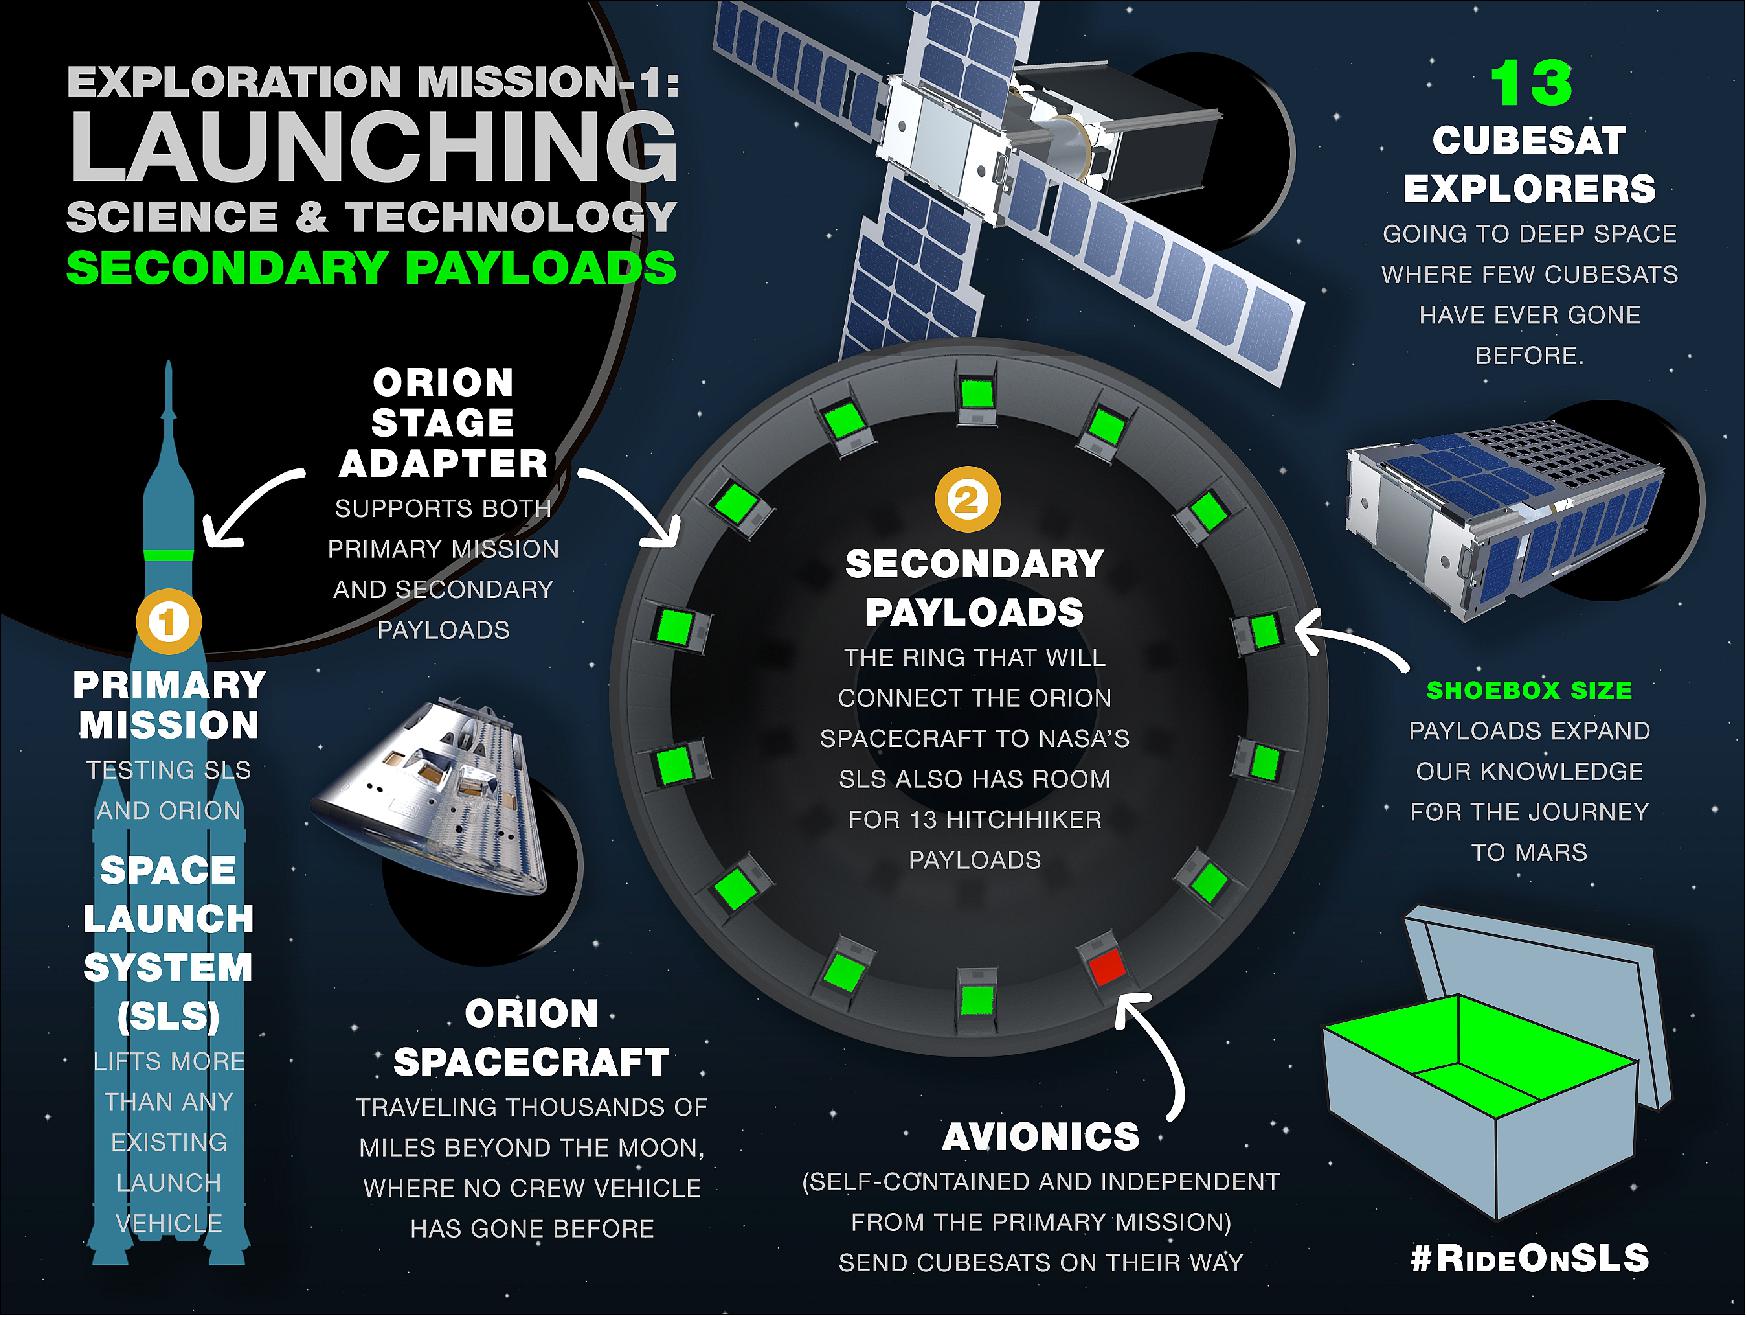 Figure 94: Secondary payloads infographic (image credit: NASA) 124)